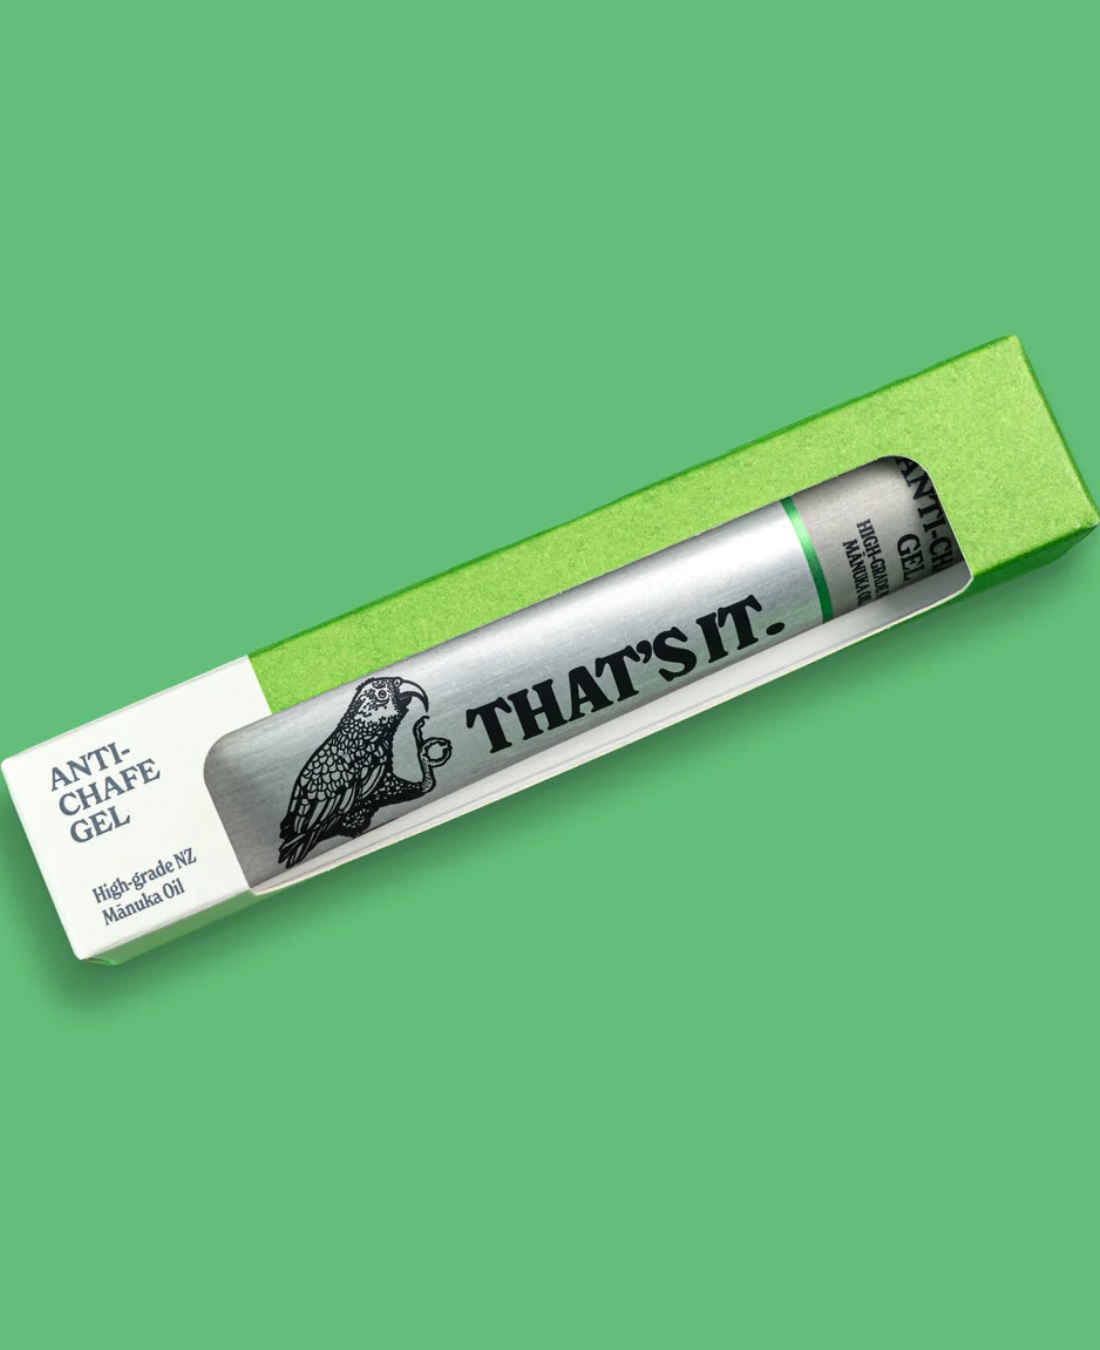 That's it anti chafe gel in silver aluminium tube in box on green background